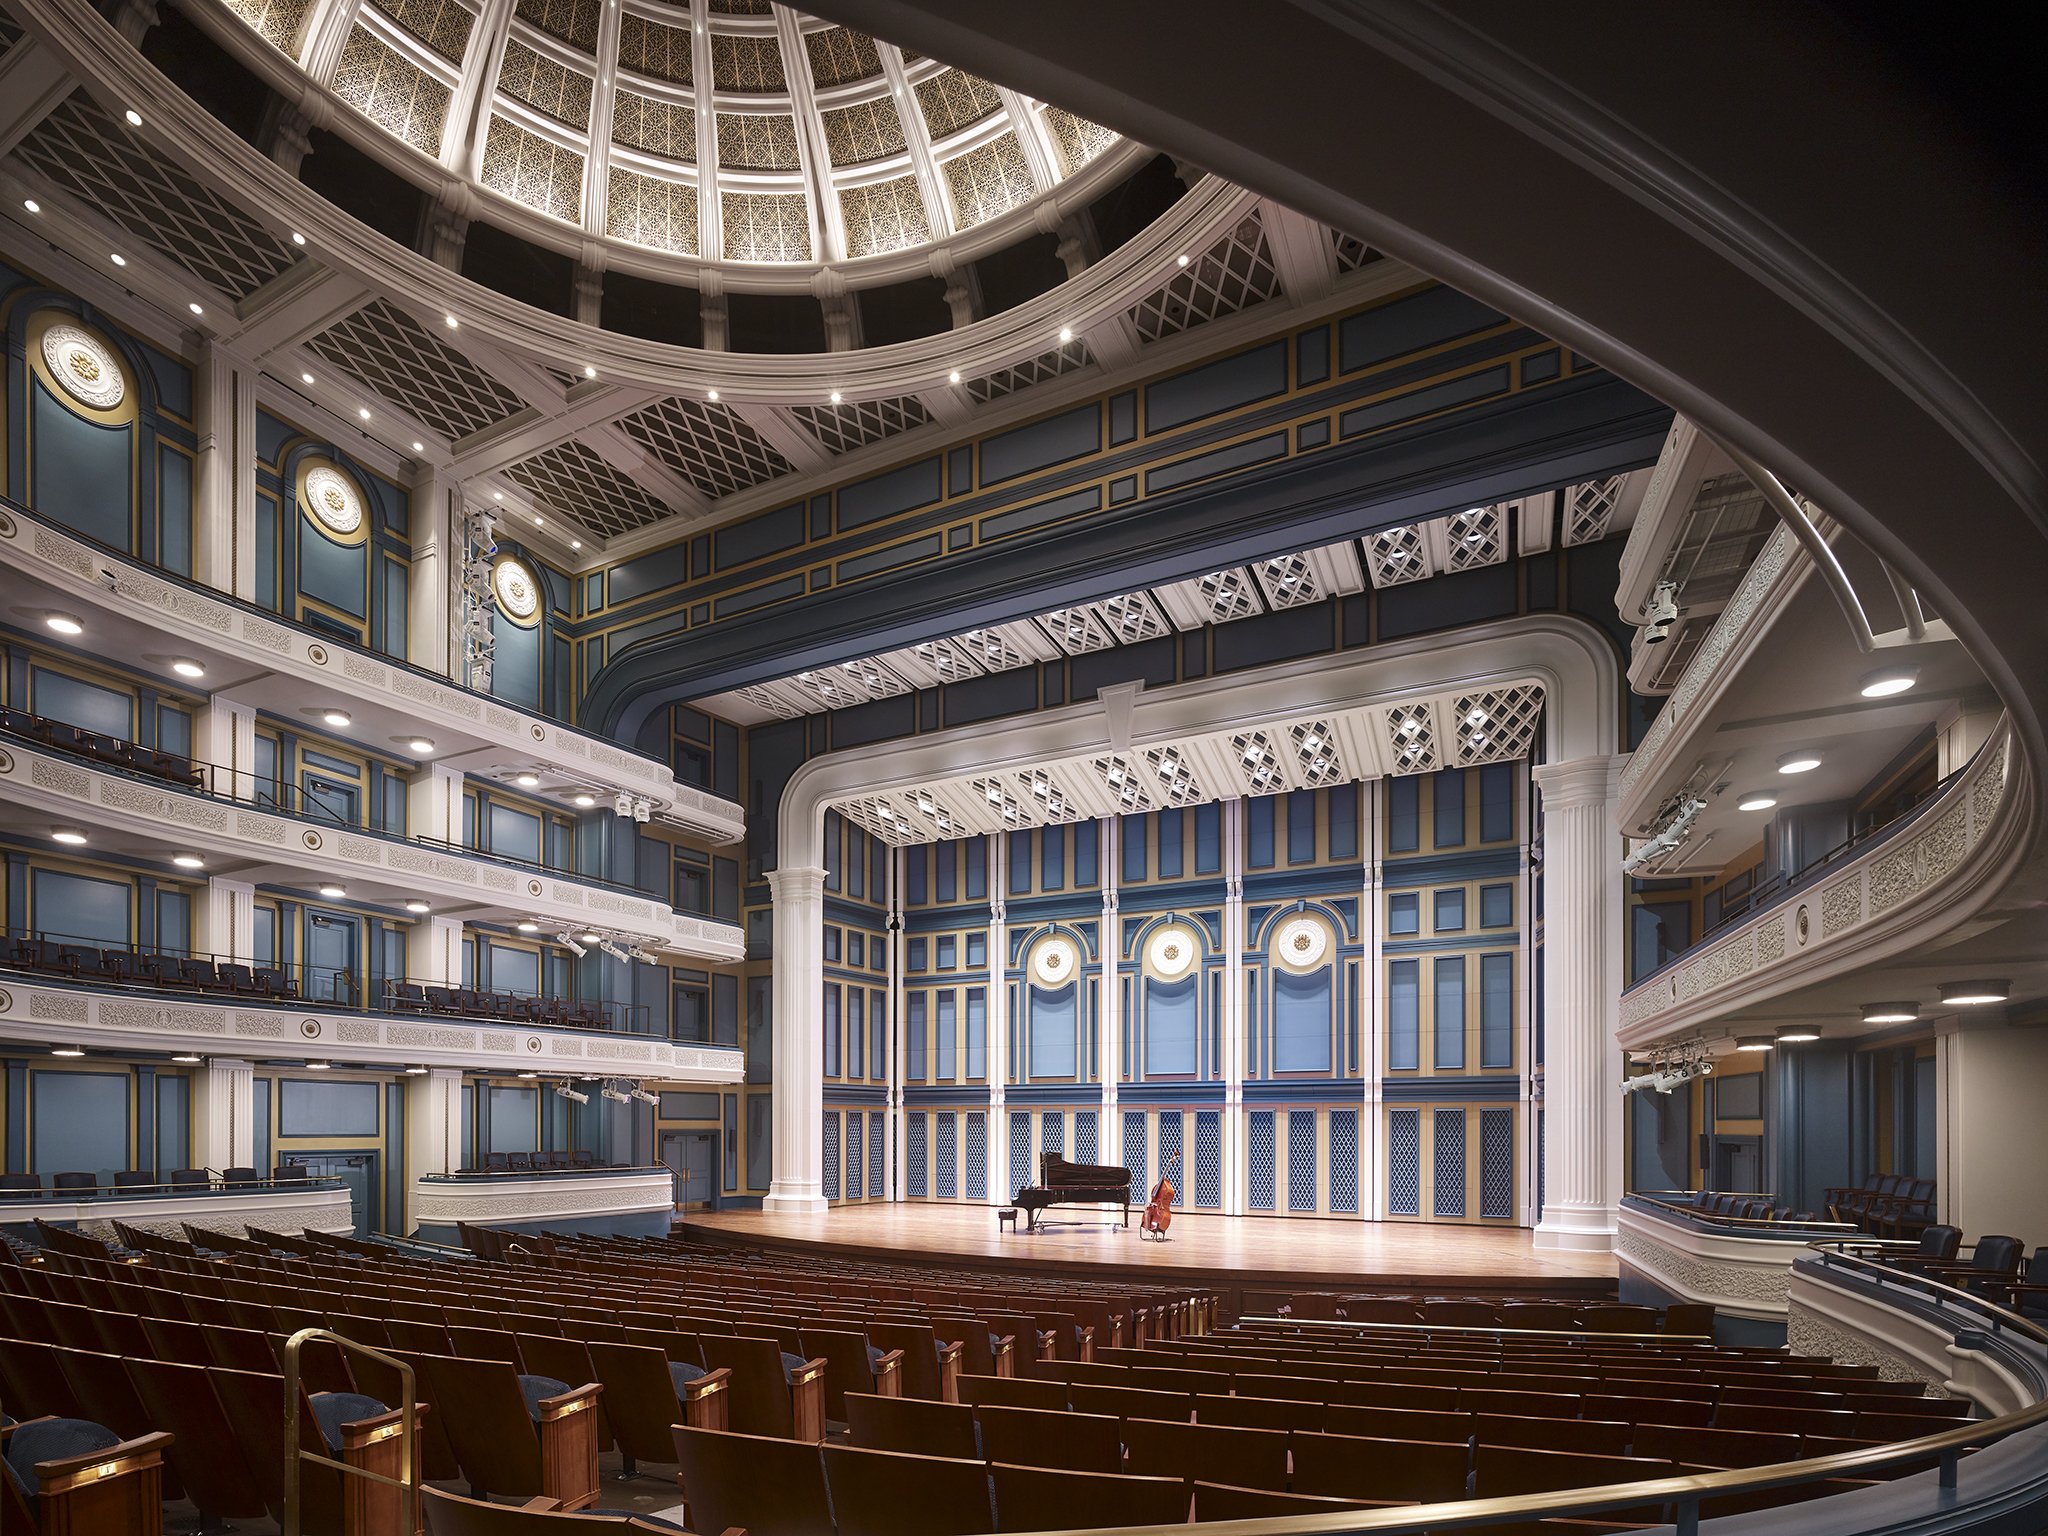  Belmont University Fisher Performing Arts Center  ESarchitects  Nashville, TN     Return to Projects  